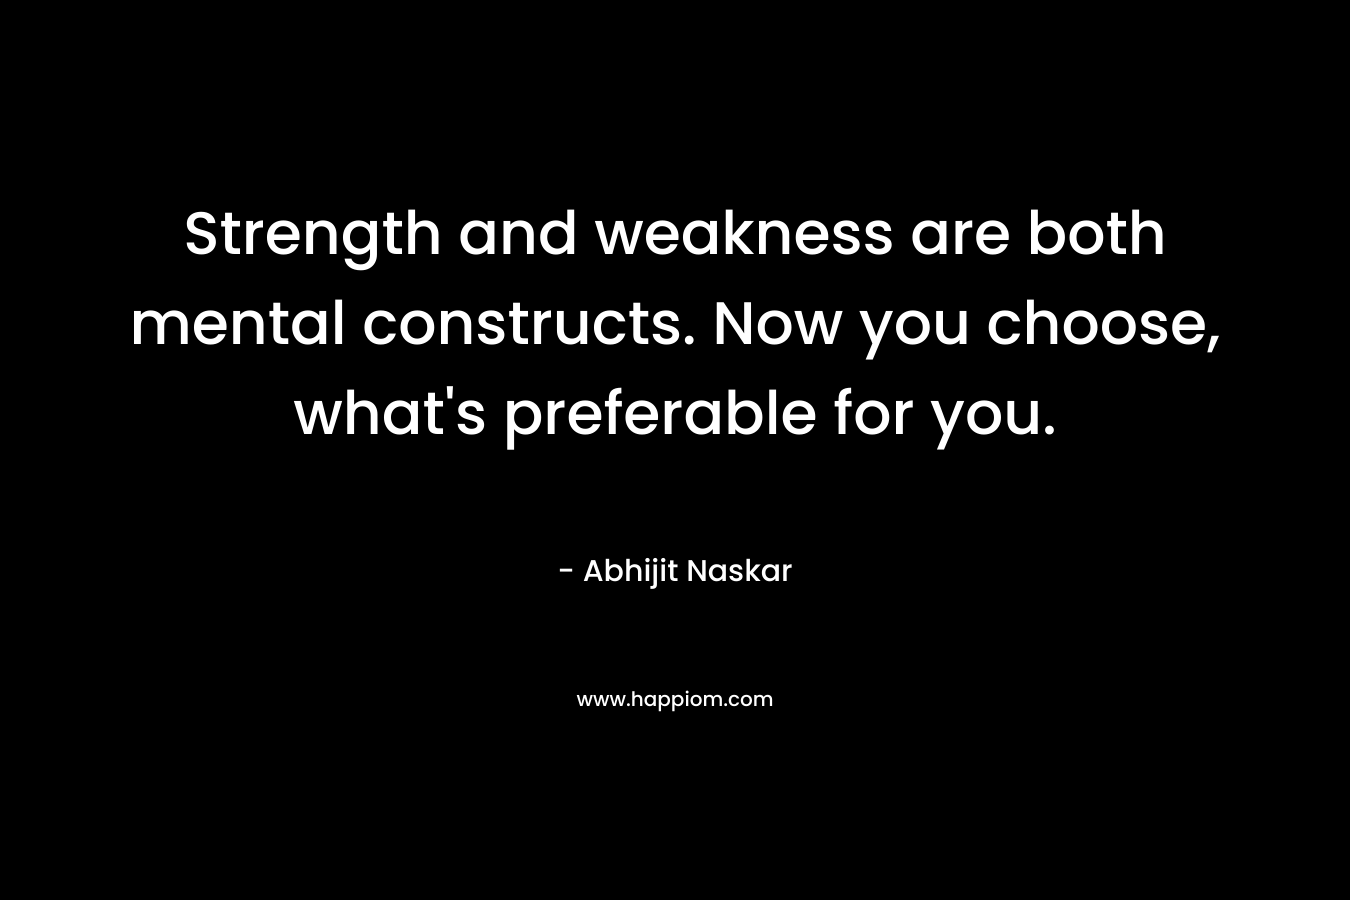 Strength and weakness are both mental constructs. Now you choose, what's preferable for you.